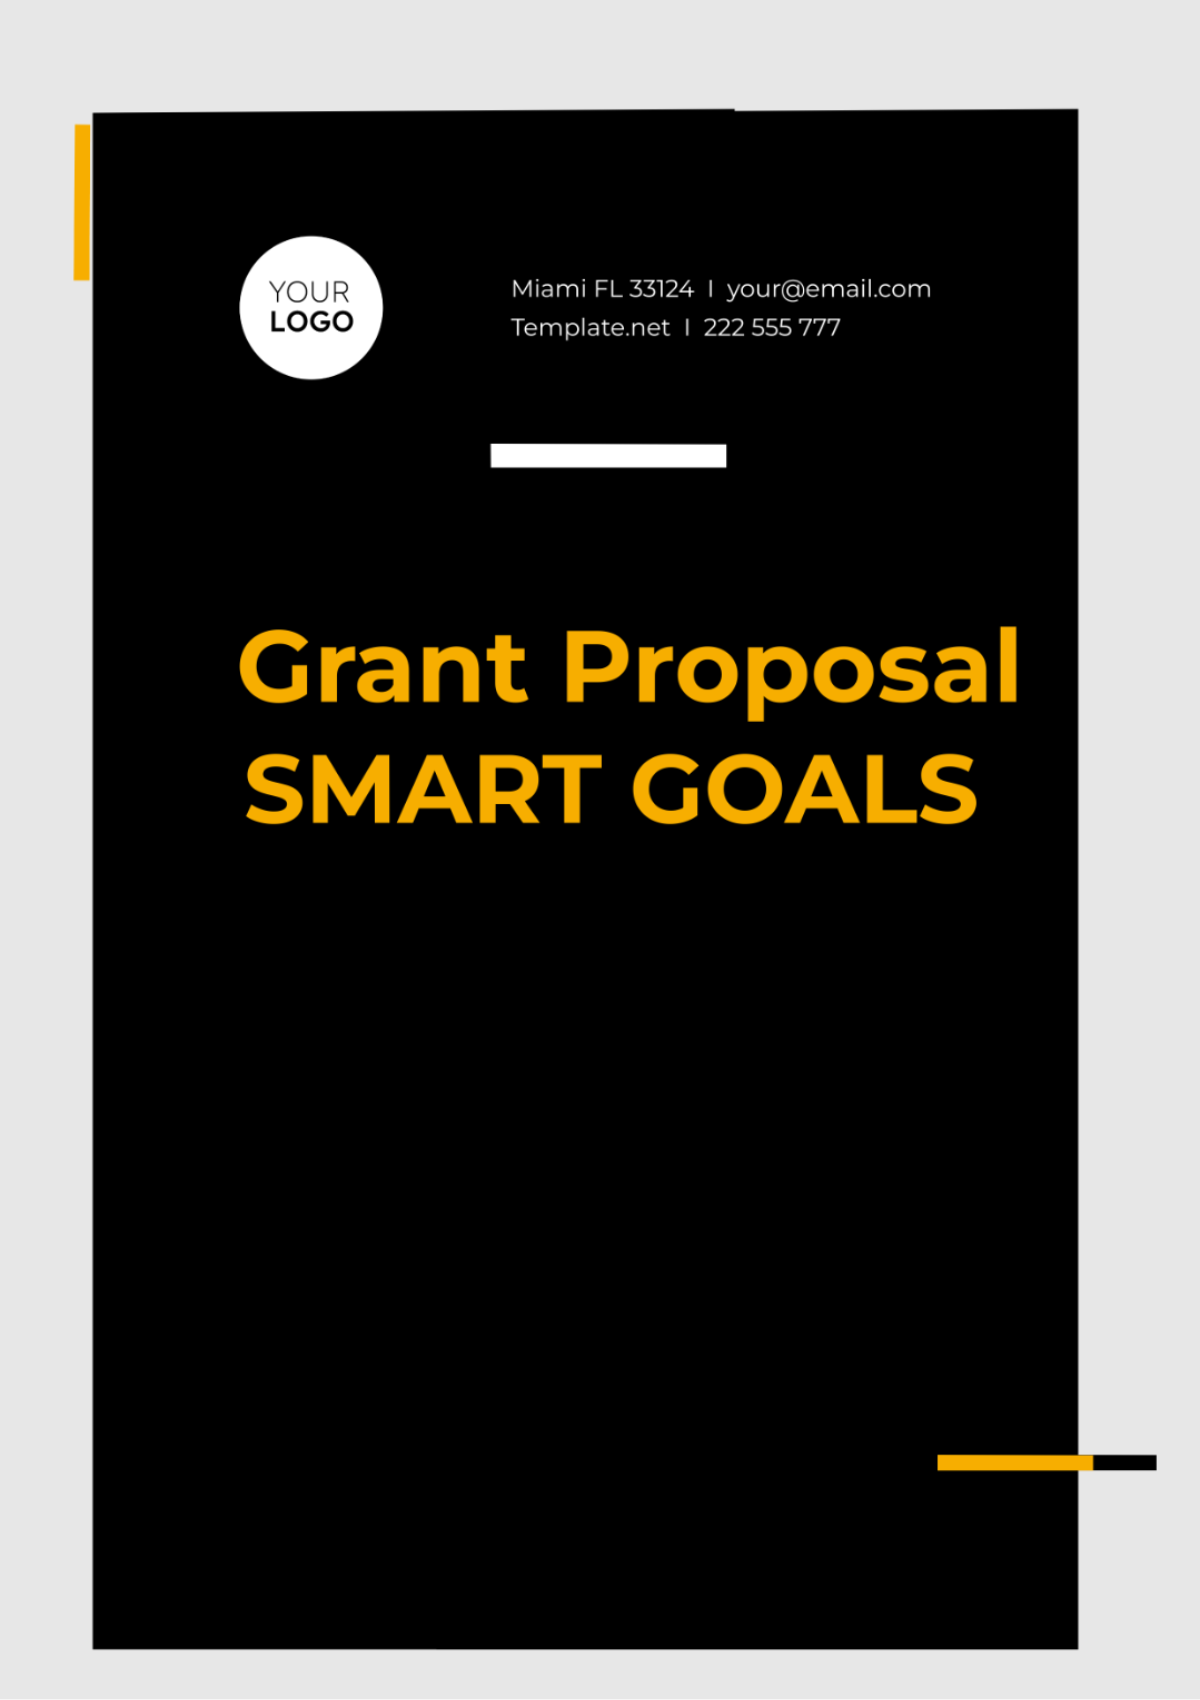 SMART Goals for a Grant Proposal Template